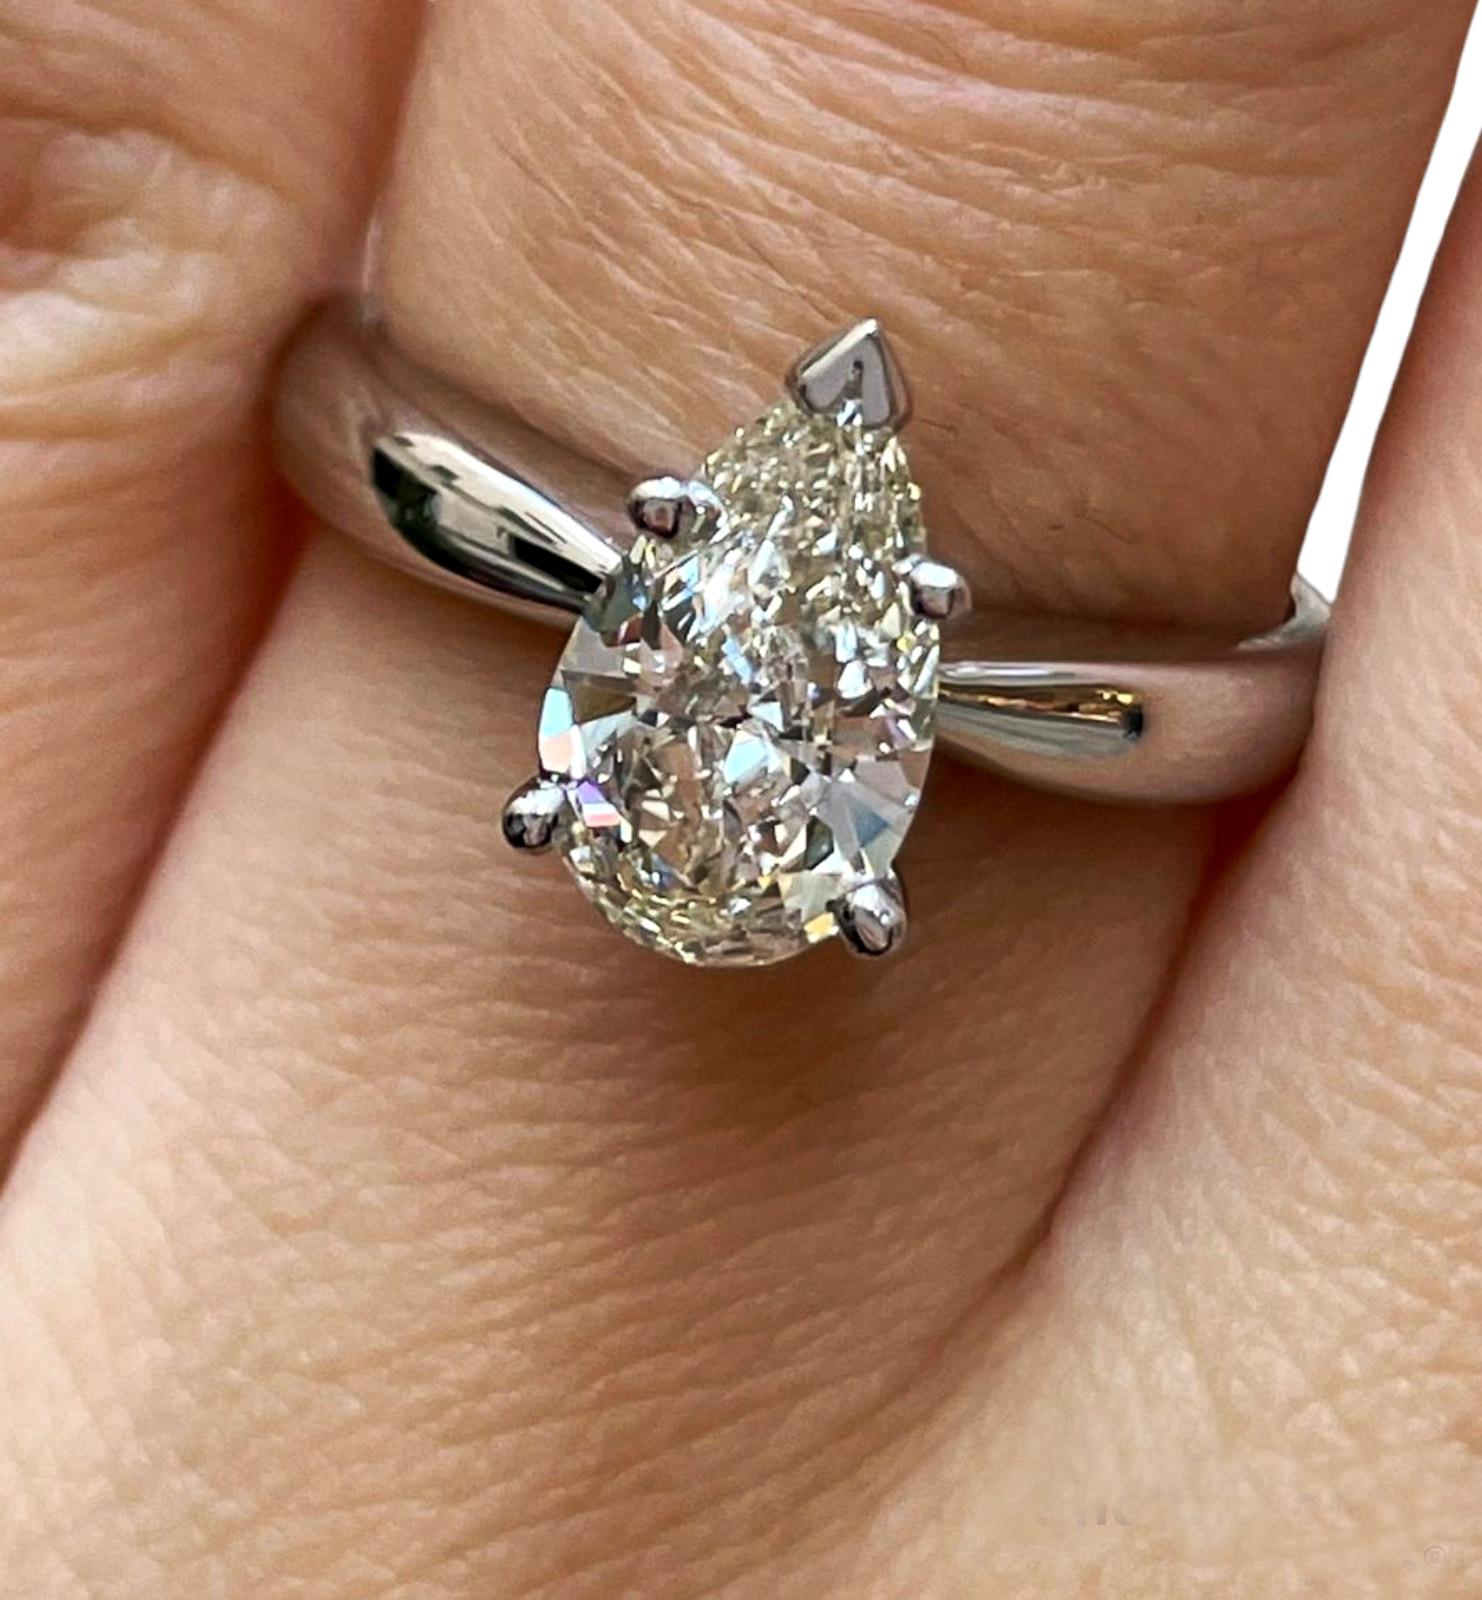 A Beautiful Classic Estate Vintage 1.07ct Pear Shaped Solitaire Ring .
Buy her this the most classic, elegant diamond ring which will go beyond her dreams!
Your loved one will cherish this fine diamond ring for a lifetime!
From our Estate